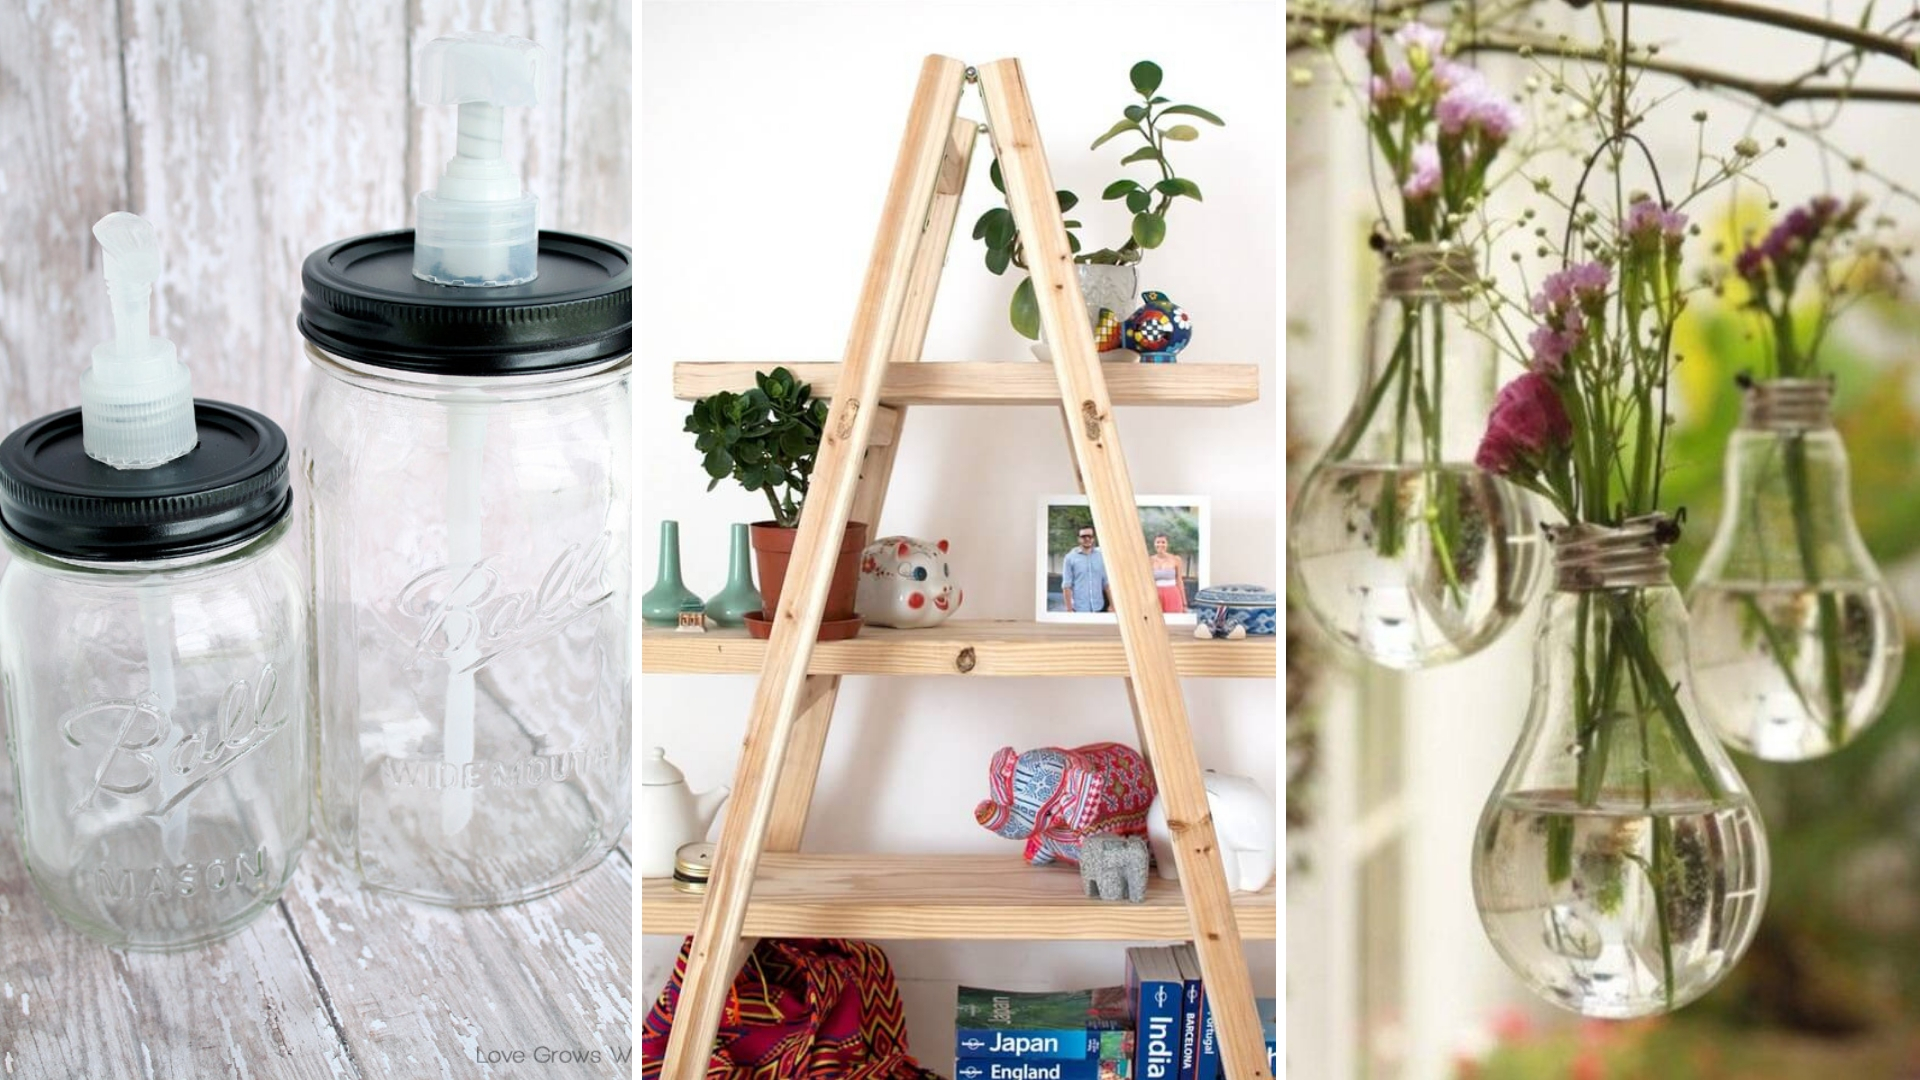 5 Ways How to Decorate a Home from Recycled Materials - Simphome